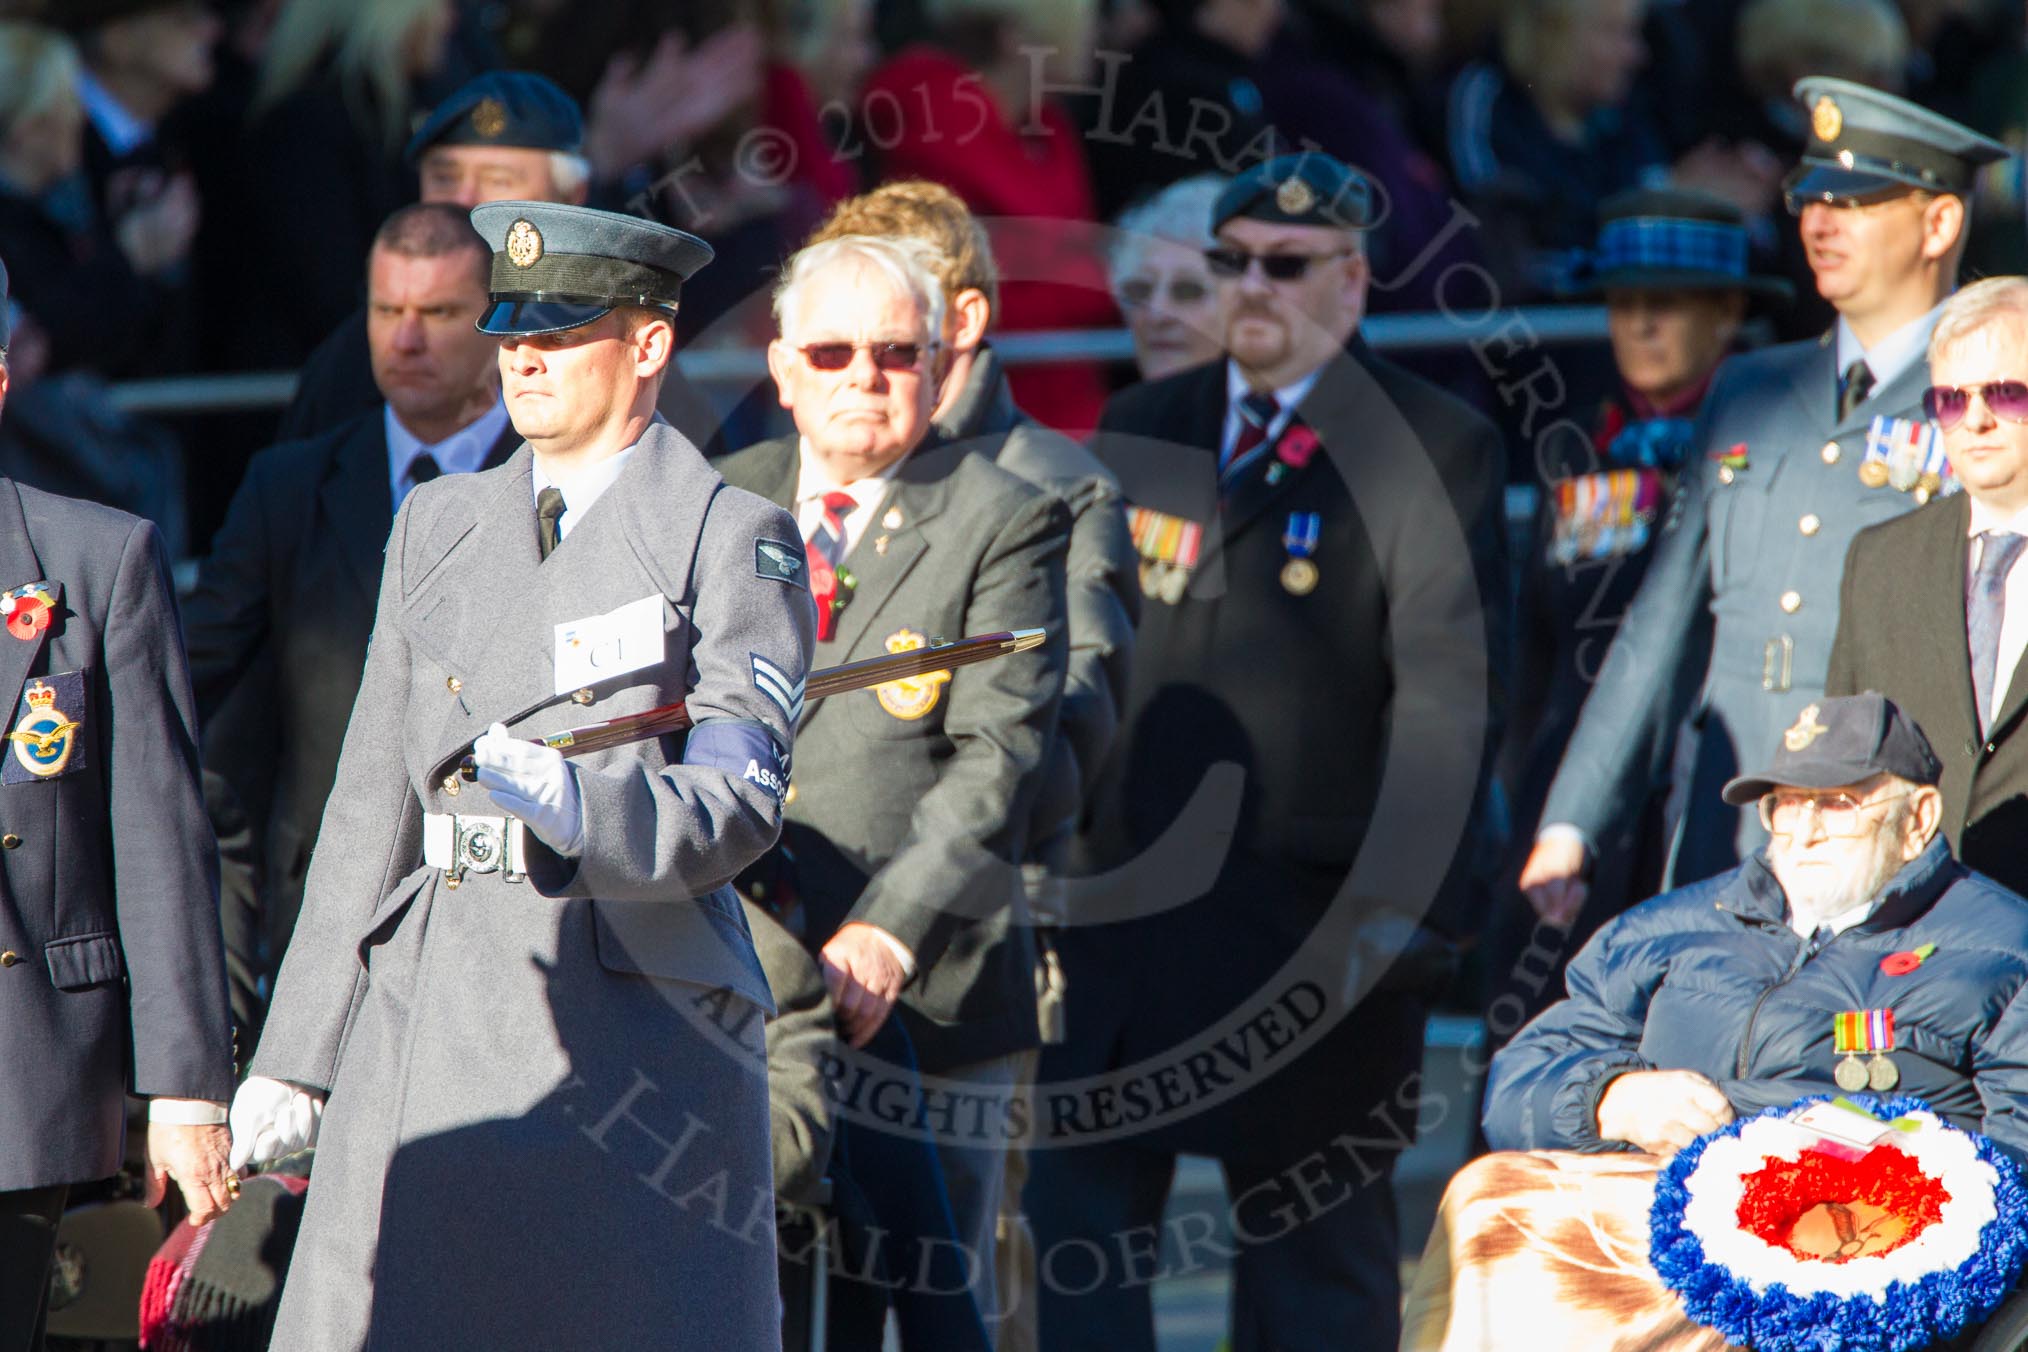 Remembrance Sunday Cenotaph March Past 2013: C1 - Royal Air Forces Association..
Press stand opposite the Foreign Office building, Whitehall, London SW1,
London,
Greater London,
United Kingdom,
on 10 November 2013 at 12:05, image #1650